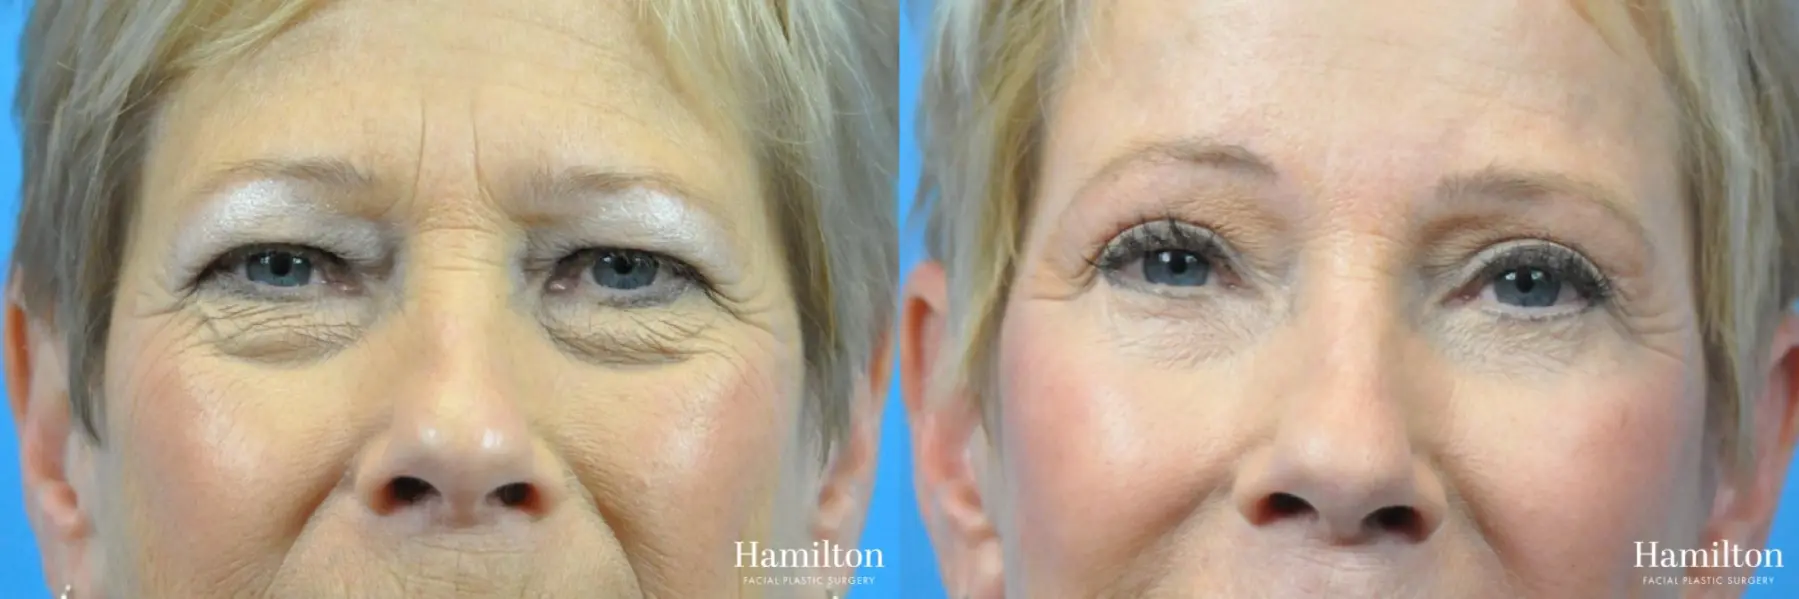 Blepharoplasty: Patient 2 - Before and After  